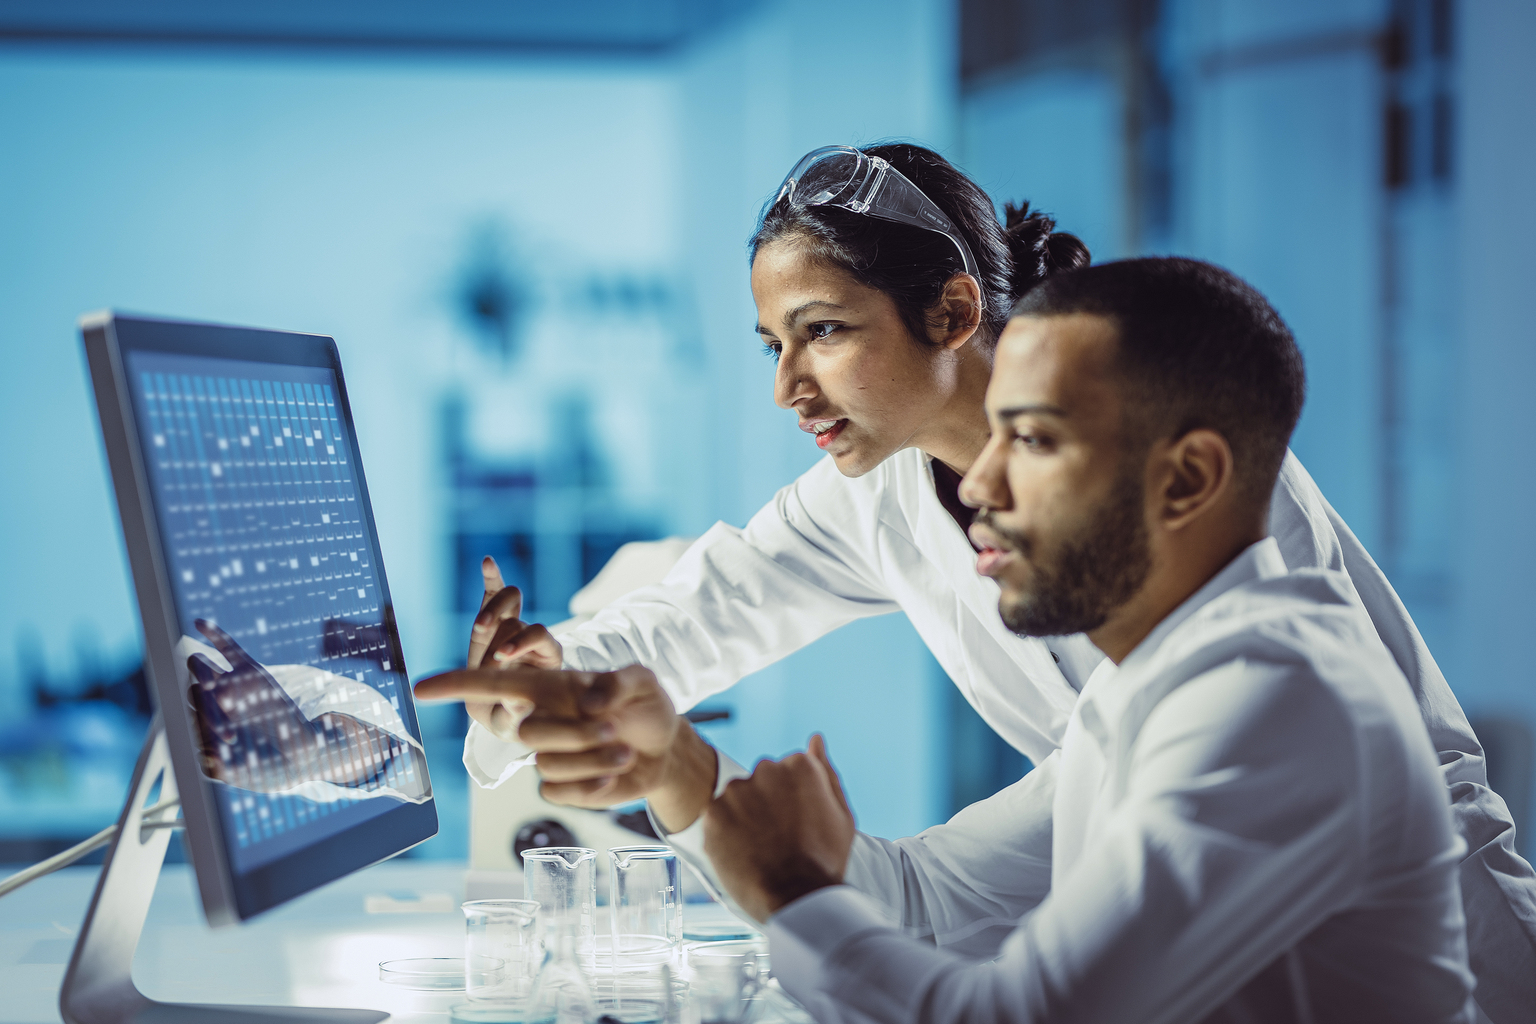 Two chemist in lab coat analyzing on a touch screen computer